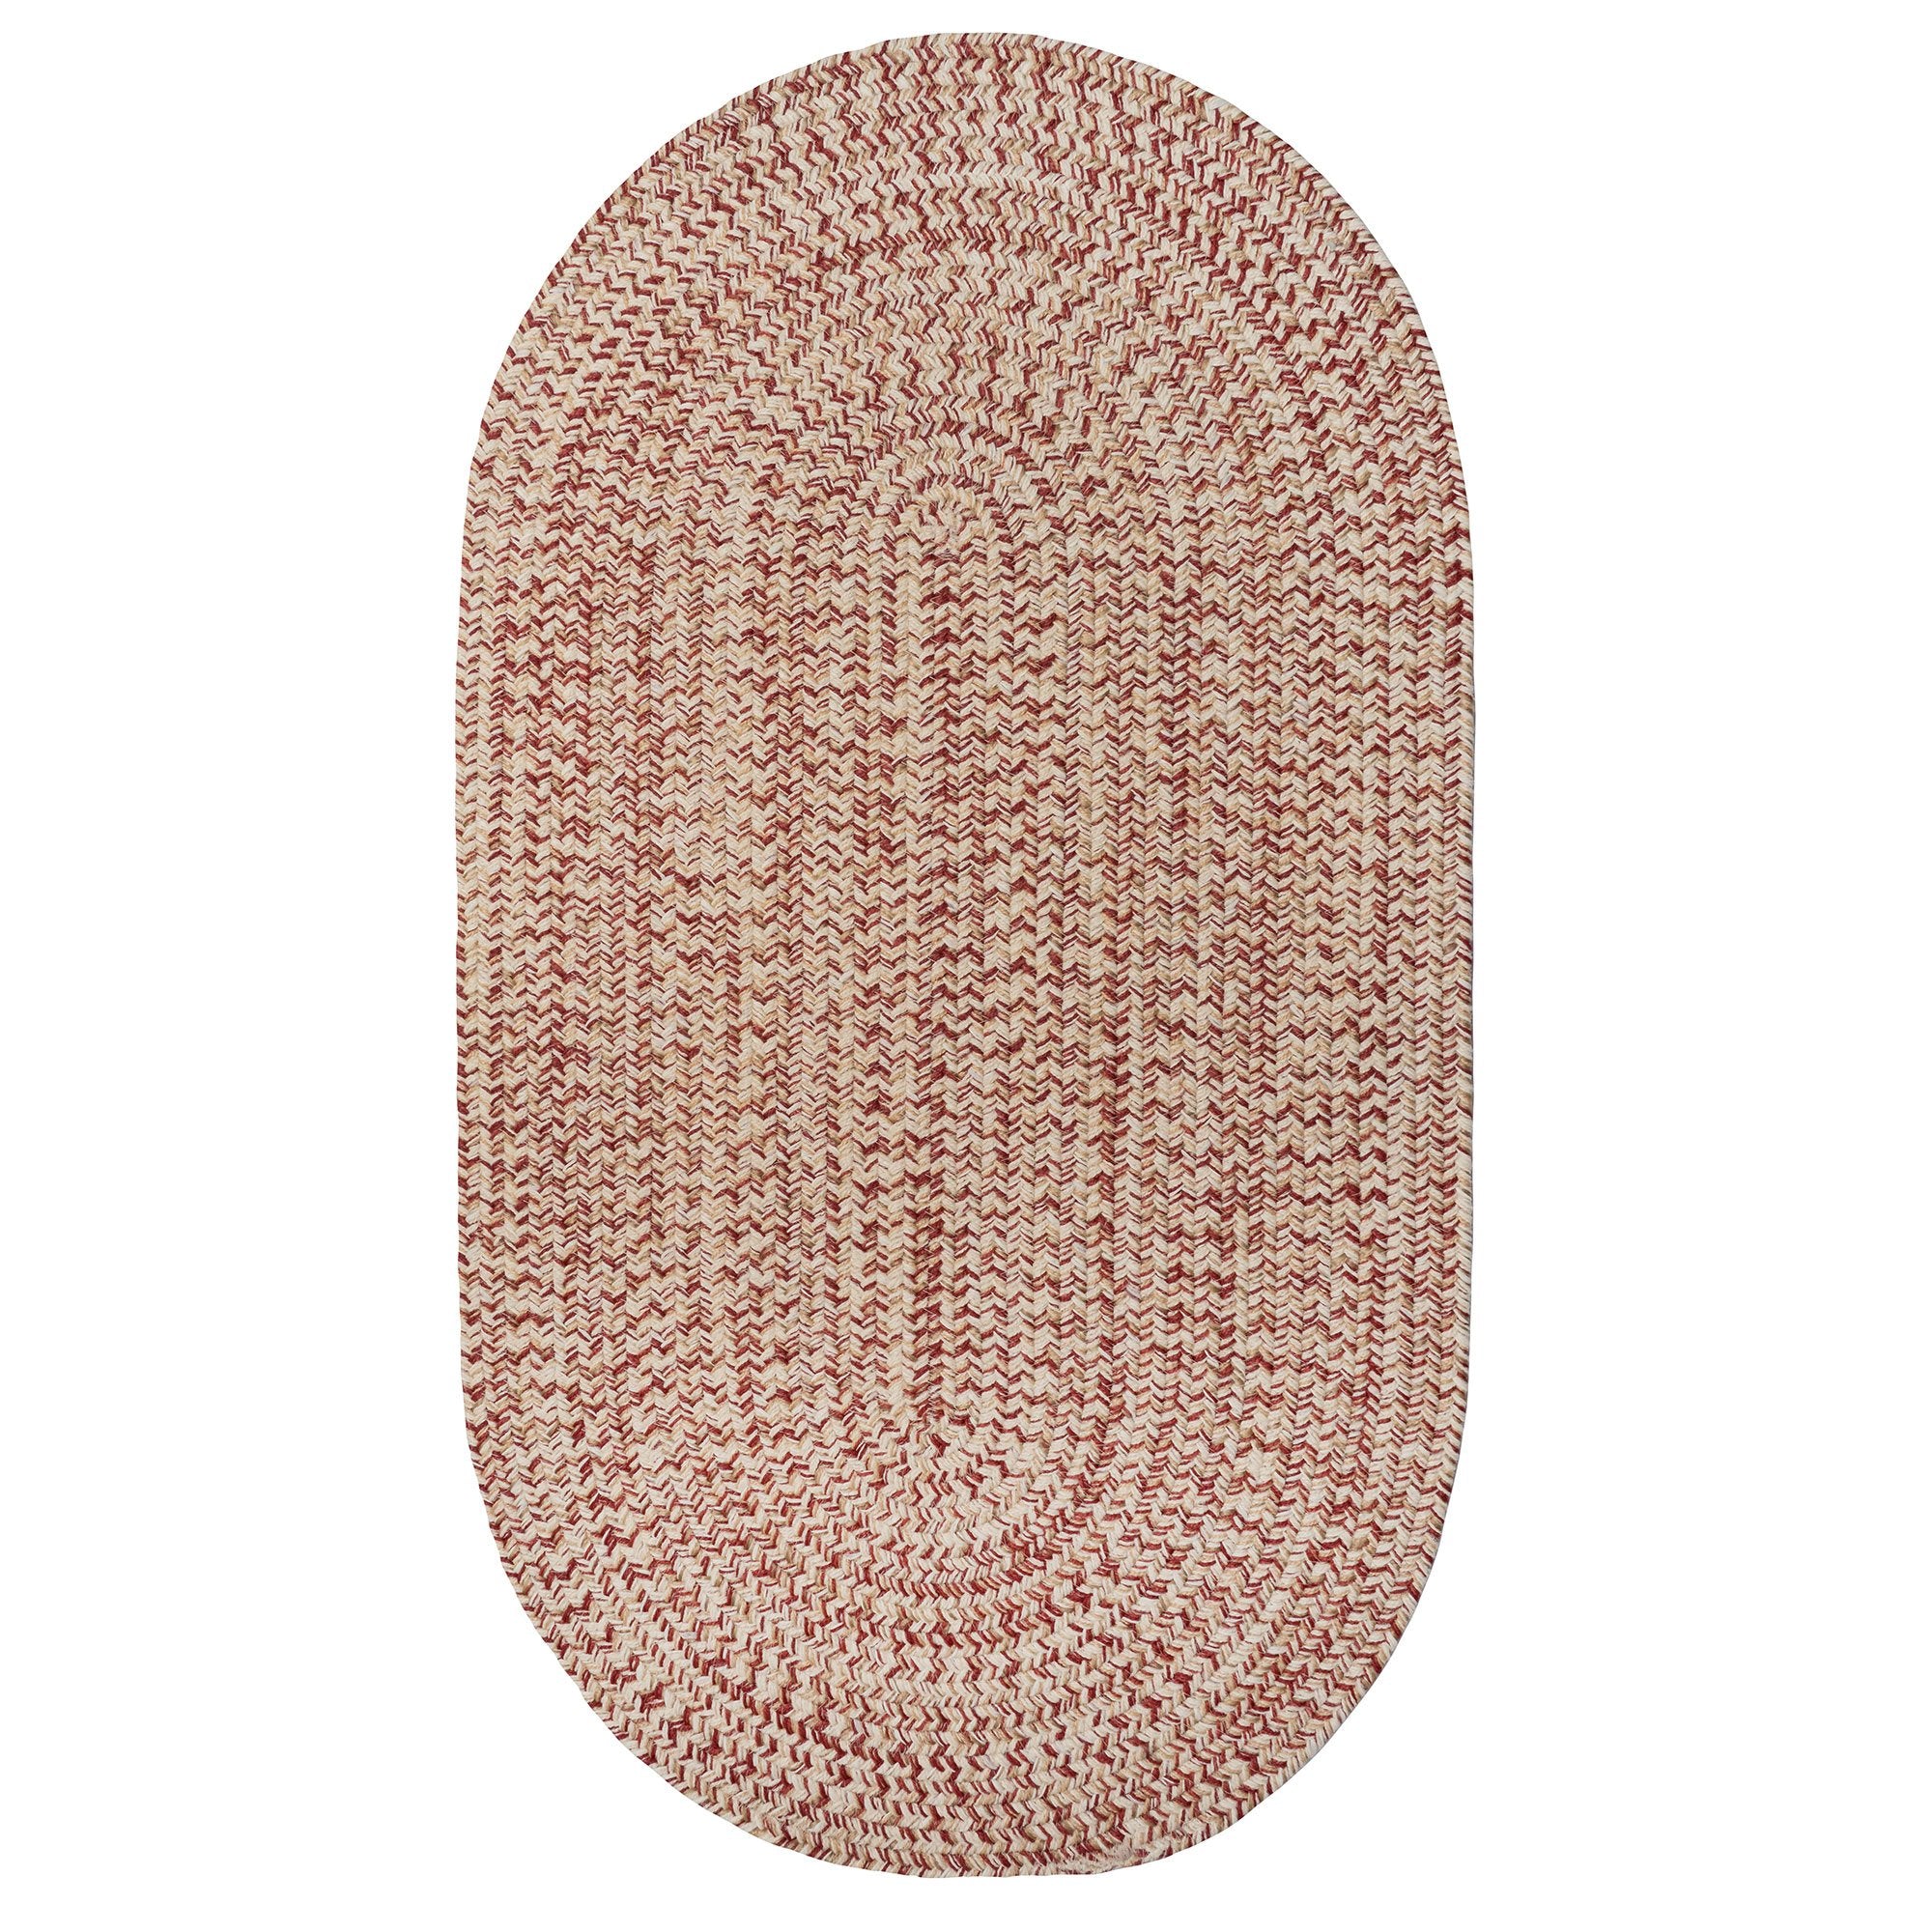 Oval Rugs - Capel Rugs Wholesale